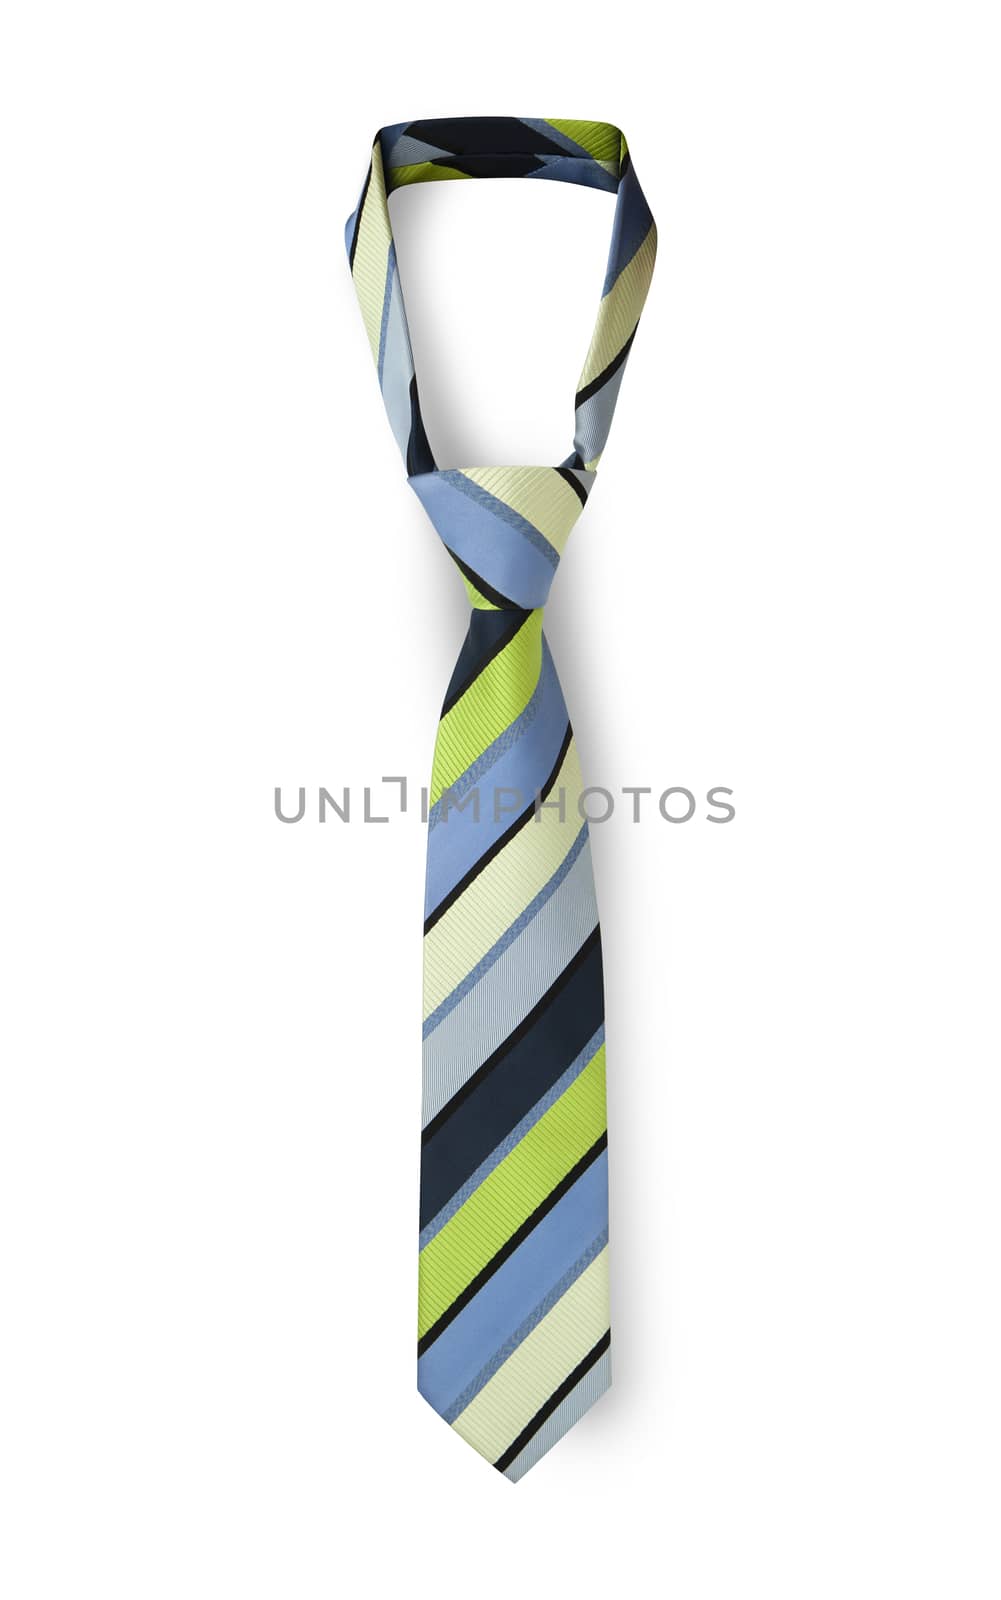 Men's striped tie in different colors taken off for leisure time by SlayCer